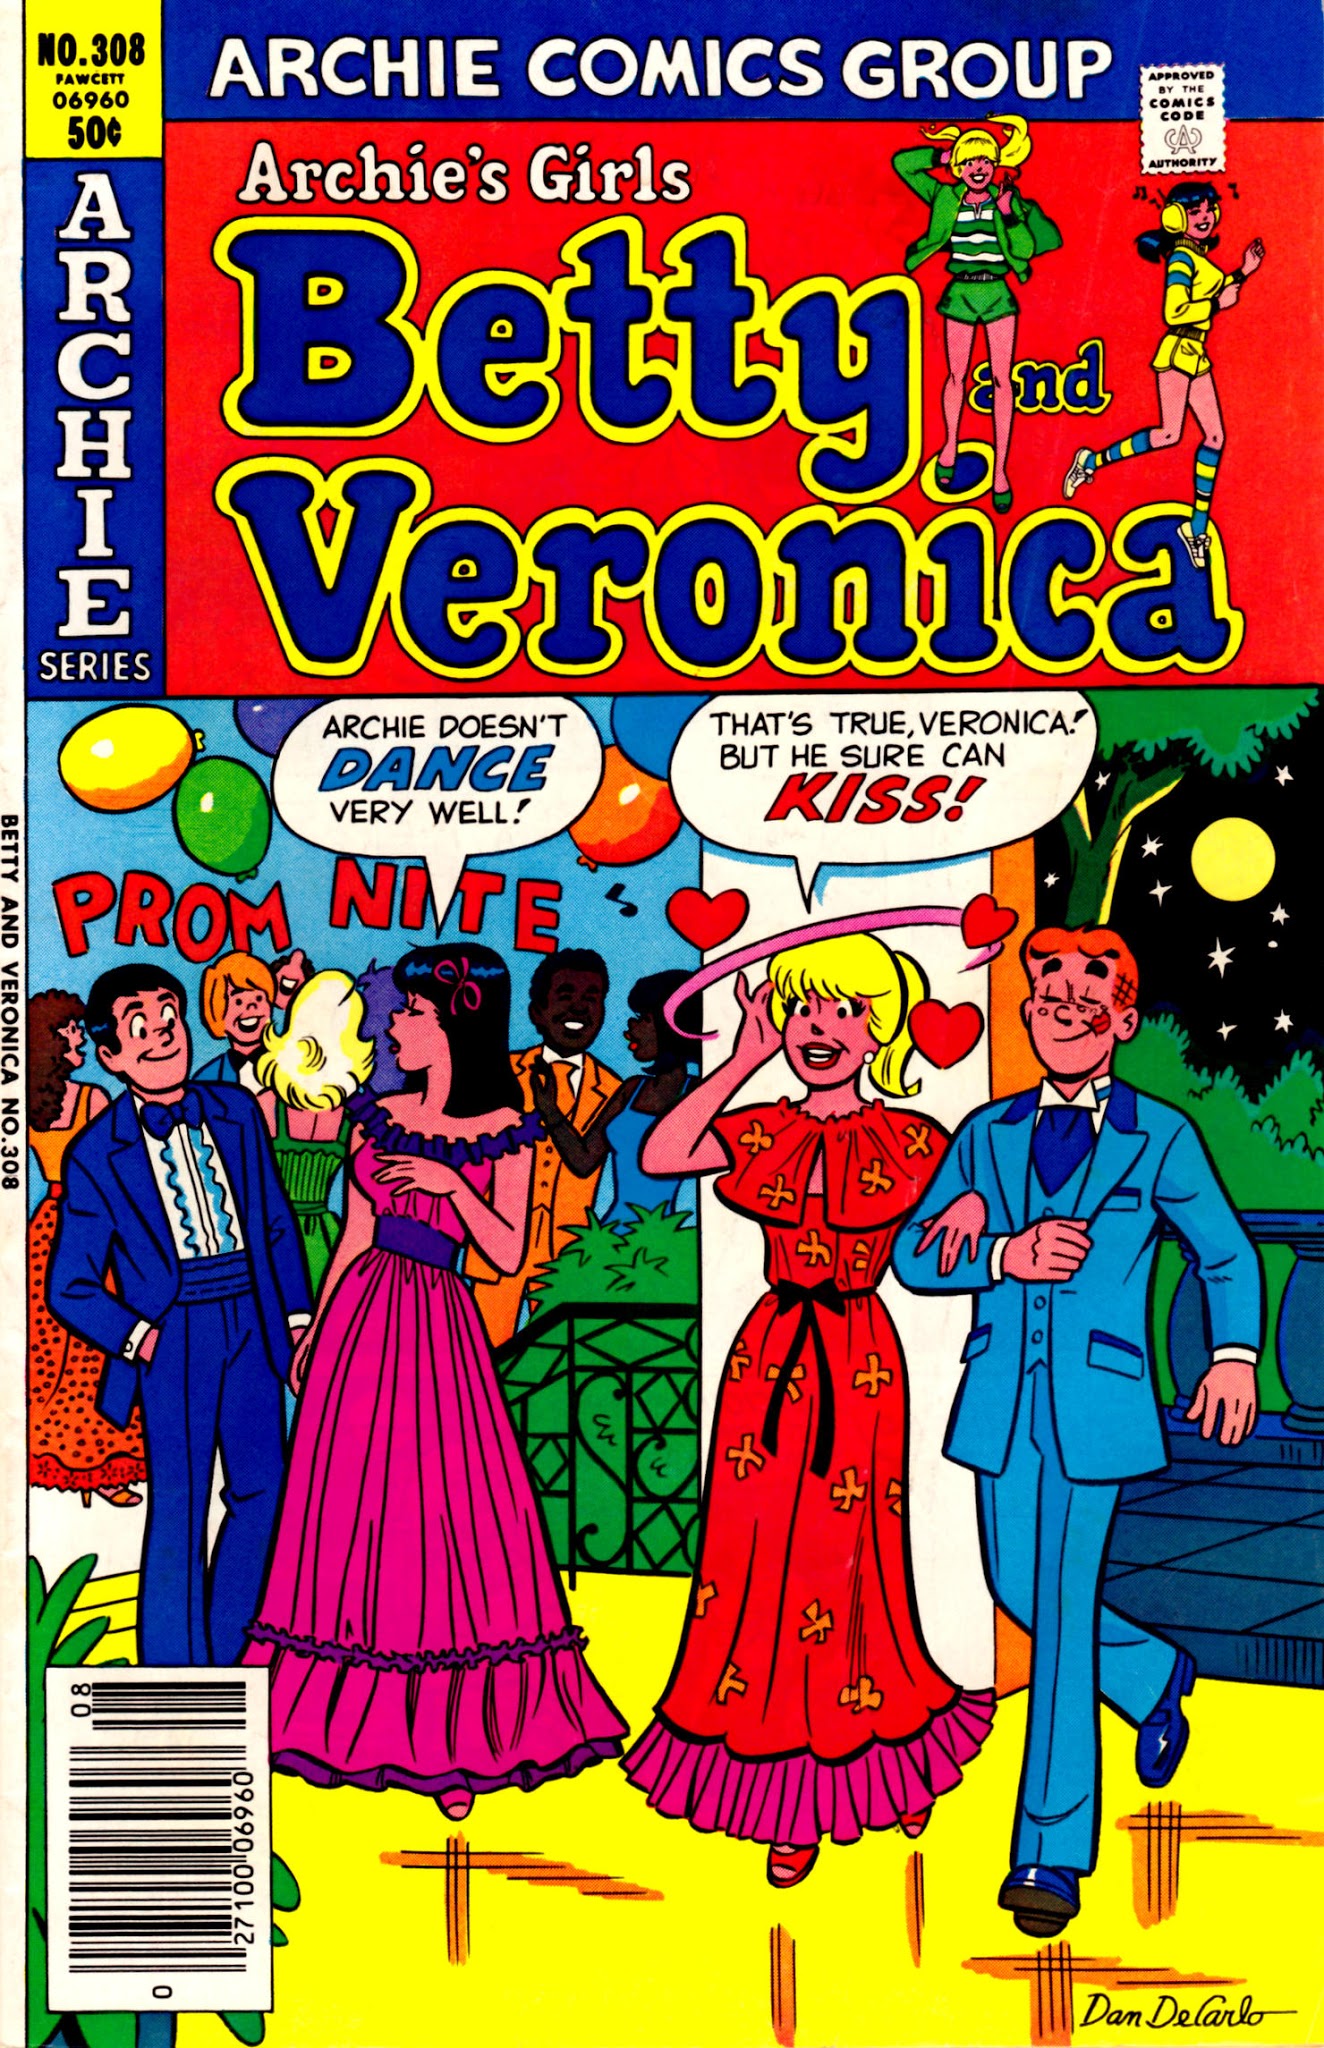 Read online Archie's Girls Betty and Veronica comic -  Issue #308 - 1